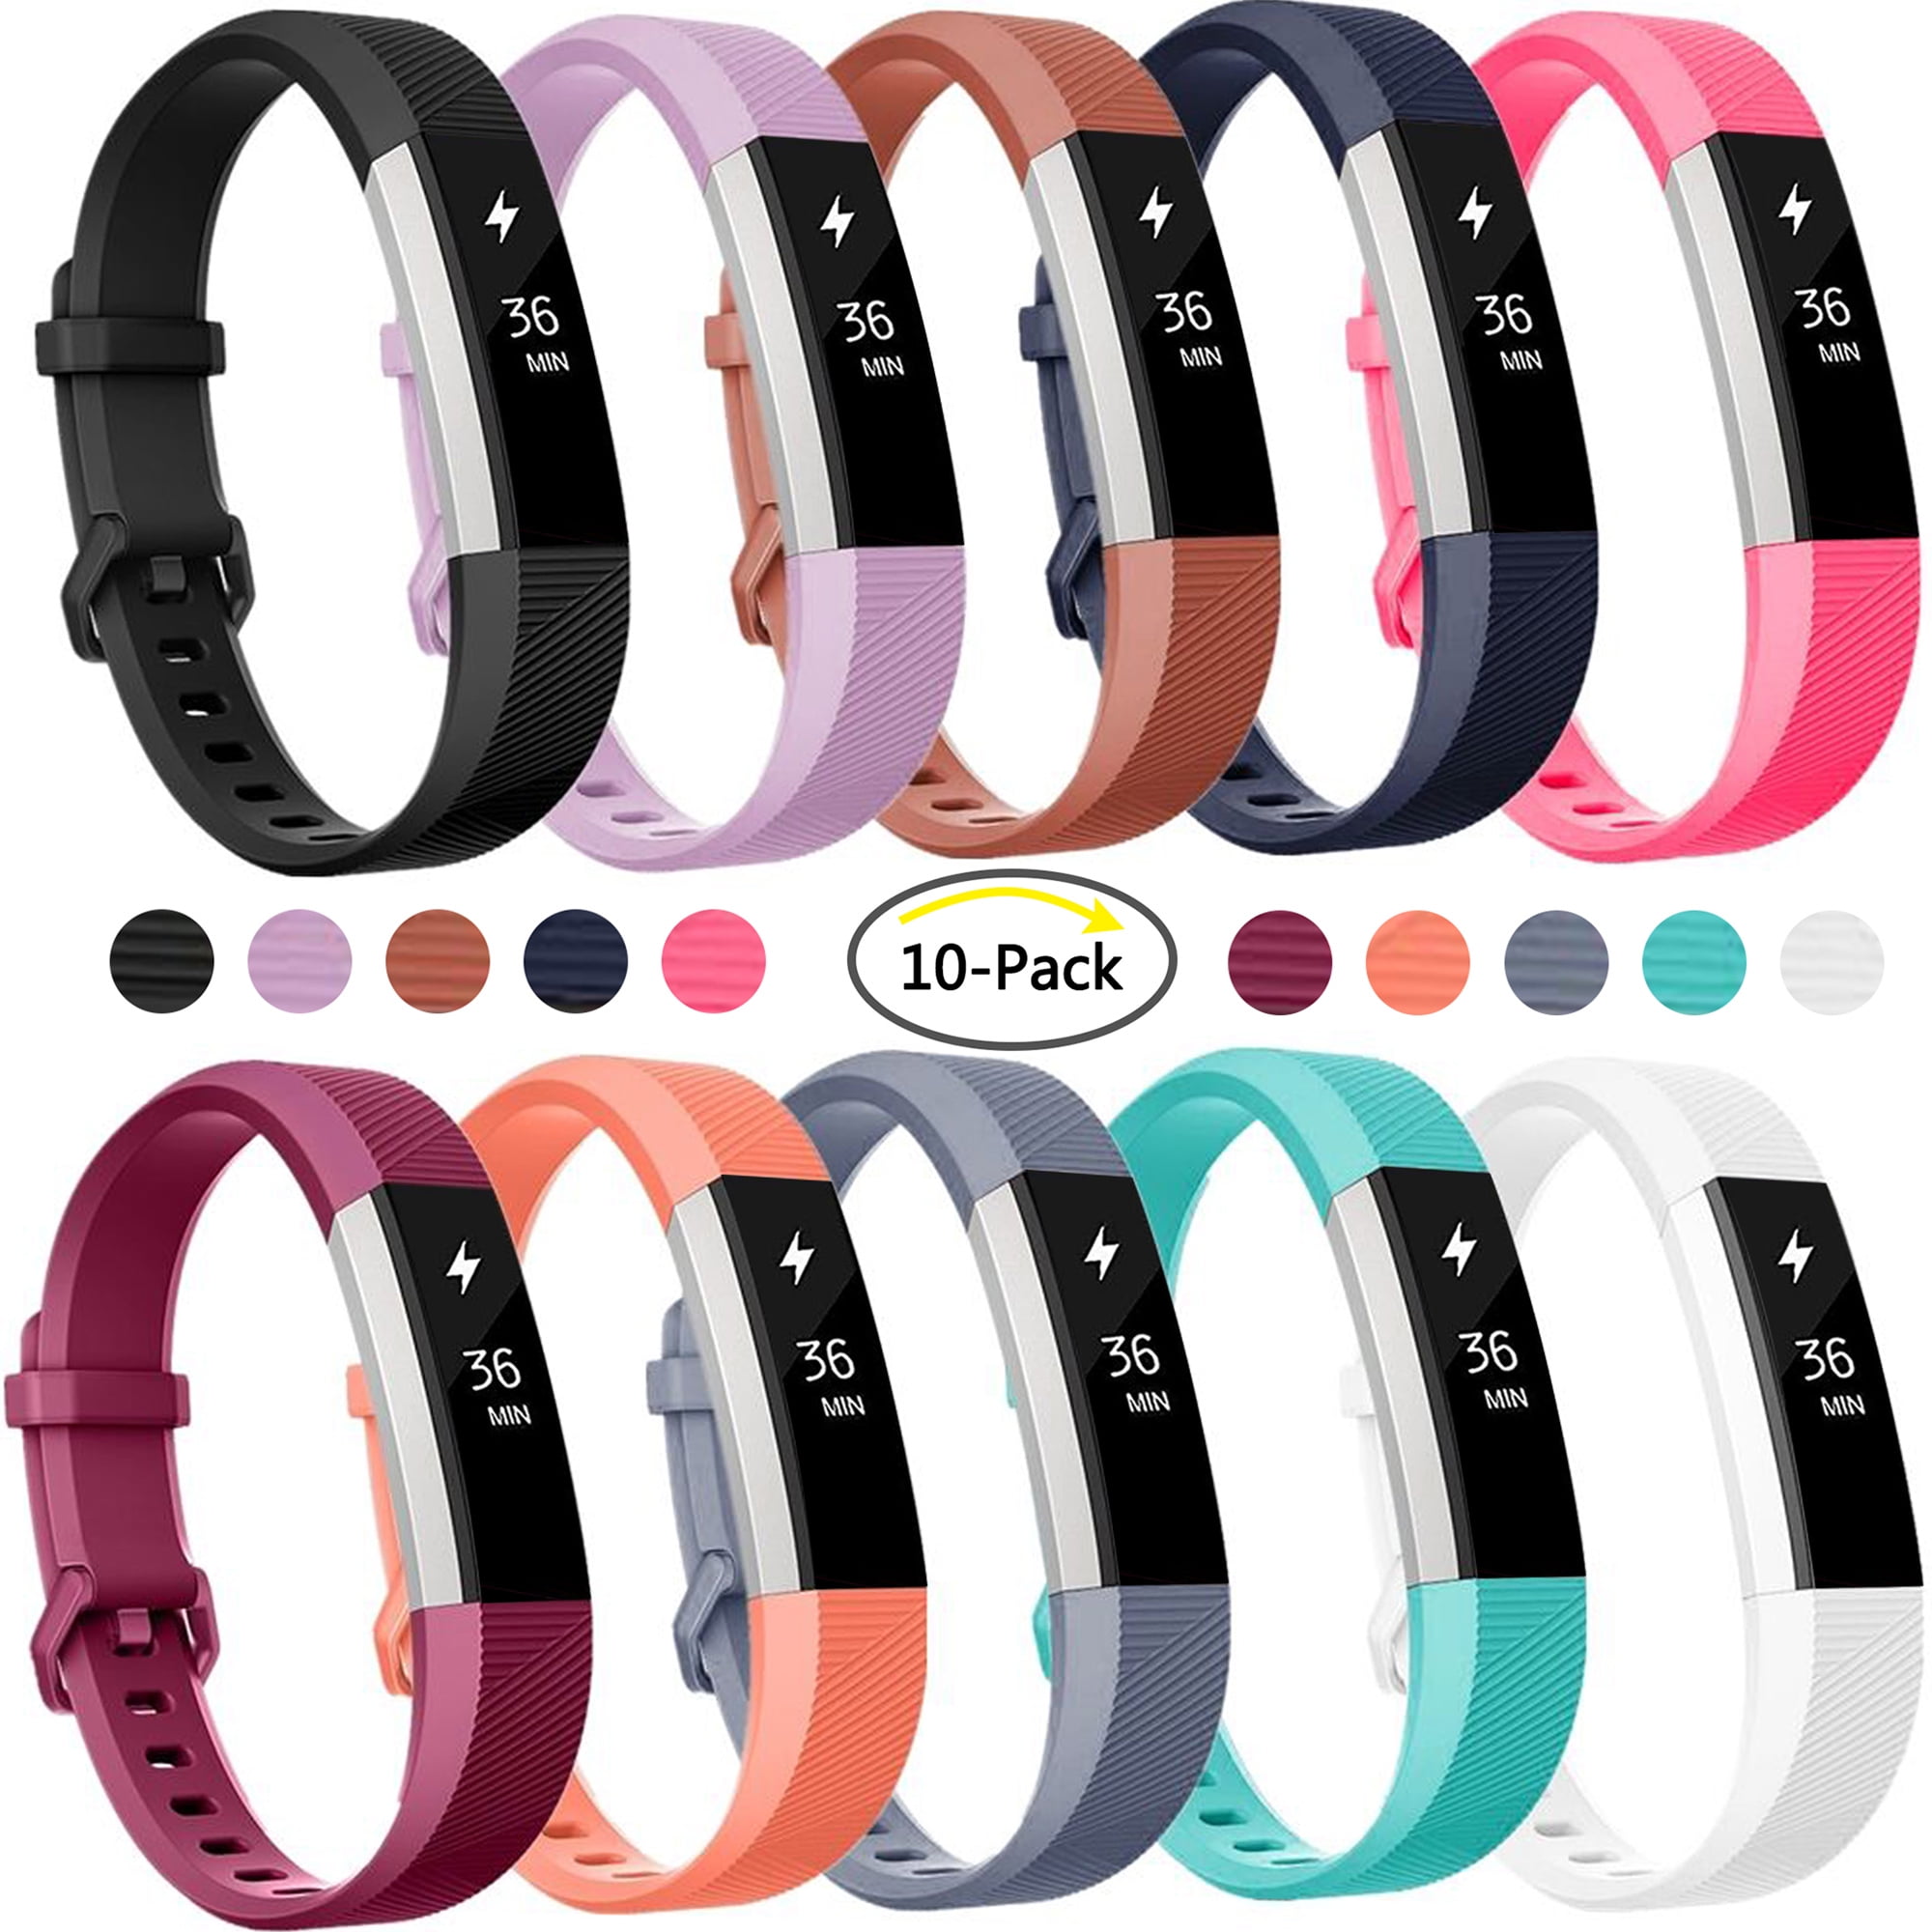 Details about   Colorful Silicone Wrist Band Strap For Fitbit Alta/ Fitbit Alta HR 